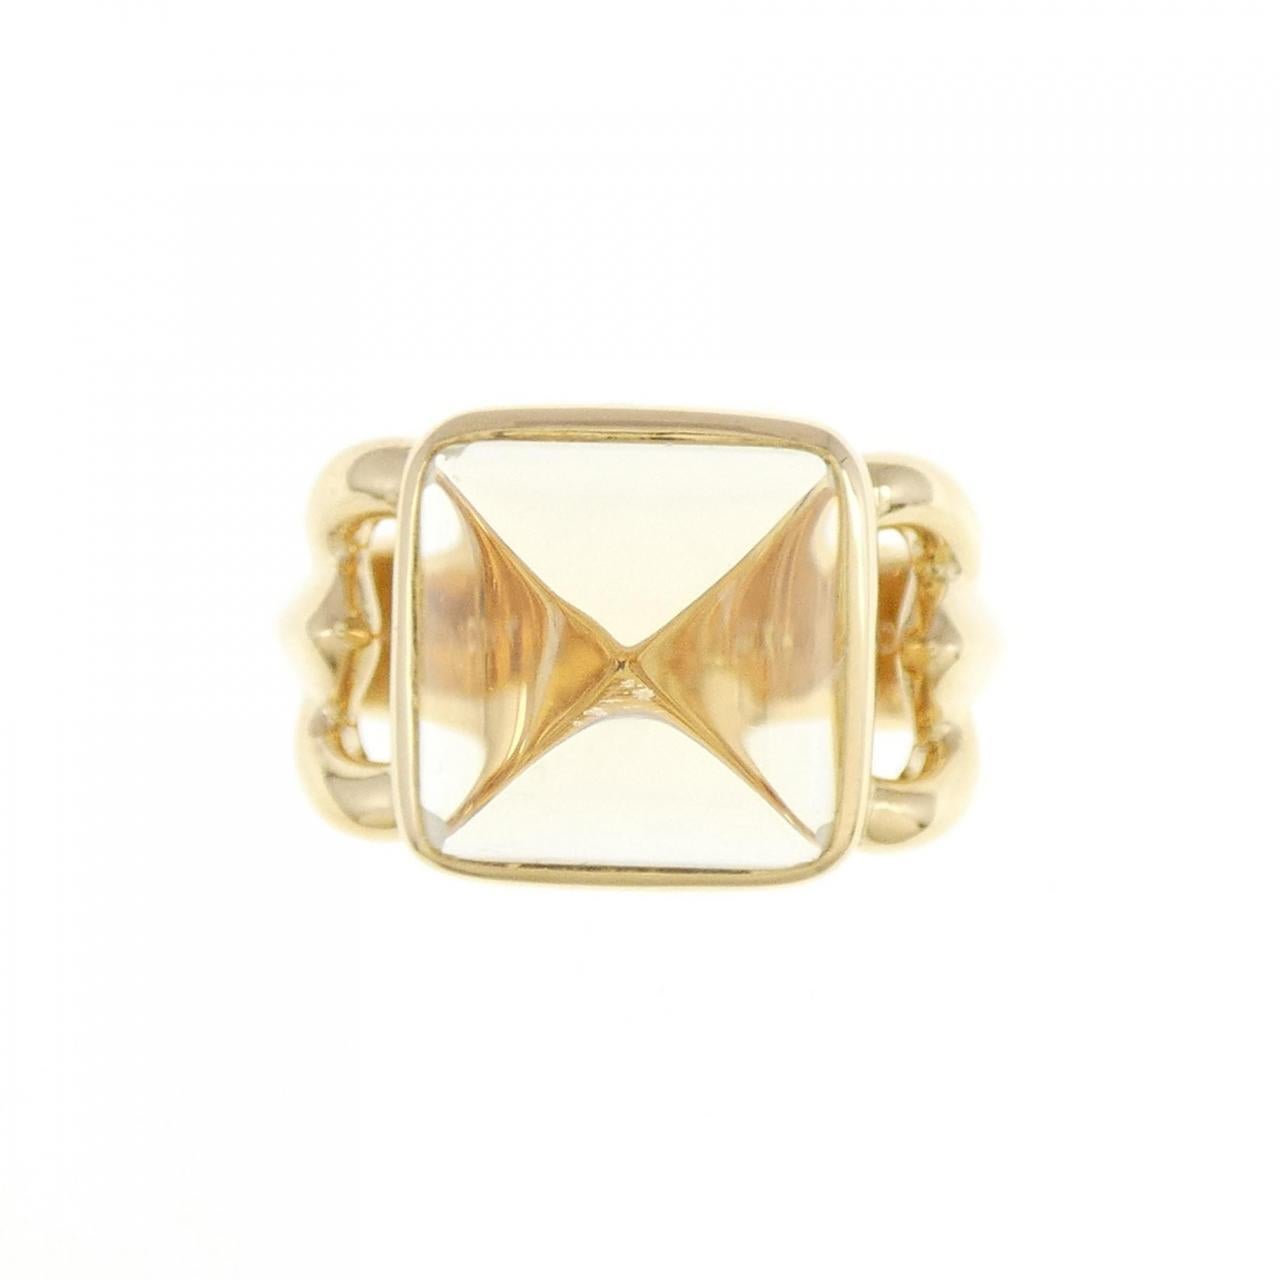 Hermes Paris 18k Yellow Gold & Quartz Ring Circa 1980s Vintage

Here is your chance to purchase a beautiful and highly collectible designer ring.  

HERMES
CenterStone	Beryl
ConditionRank	A
Gender	Ladies'
Material	750 Yellow Gold
Size	6 (US size)